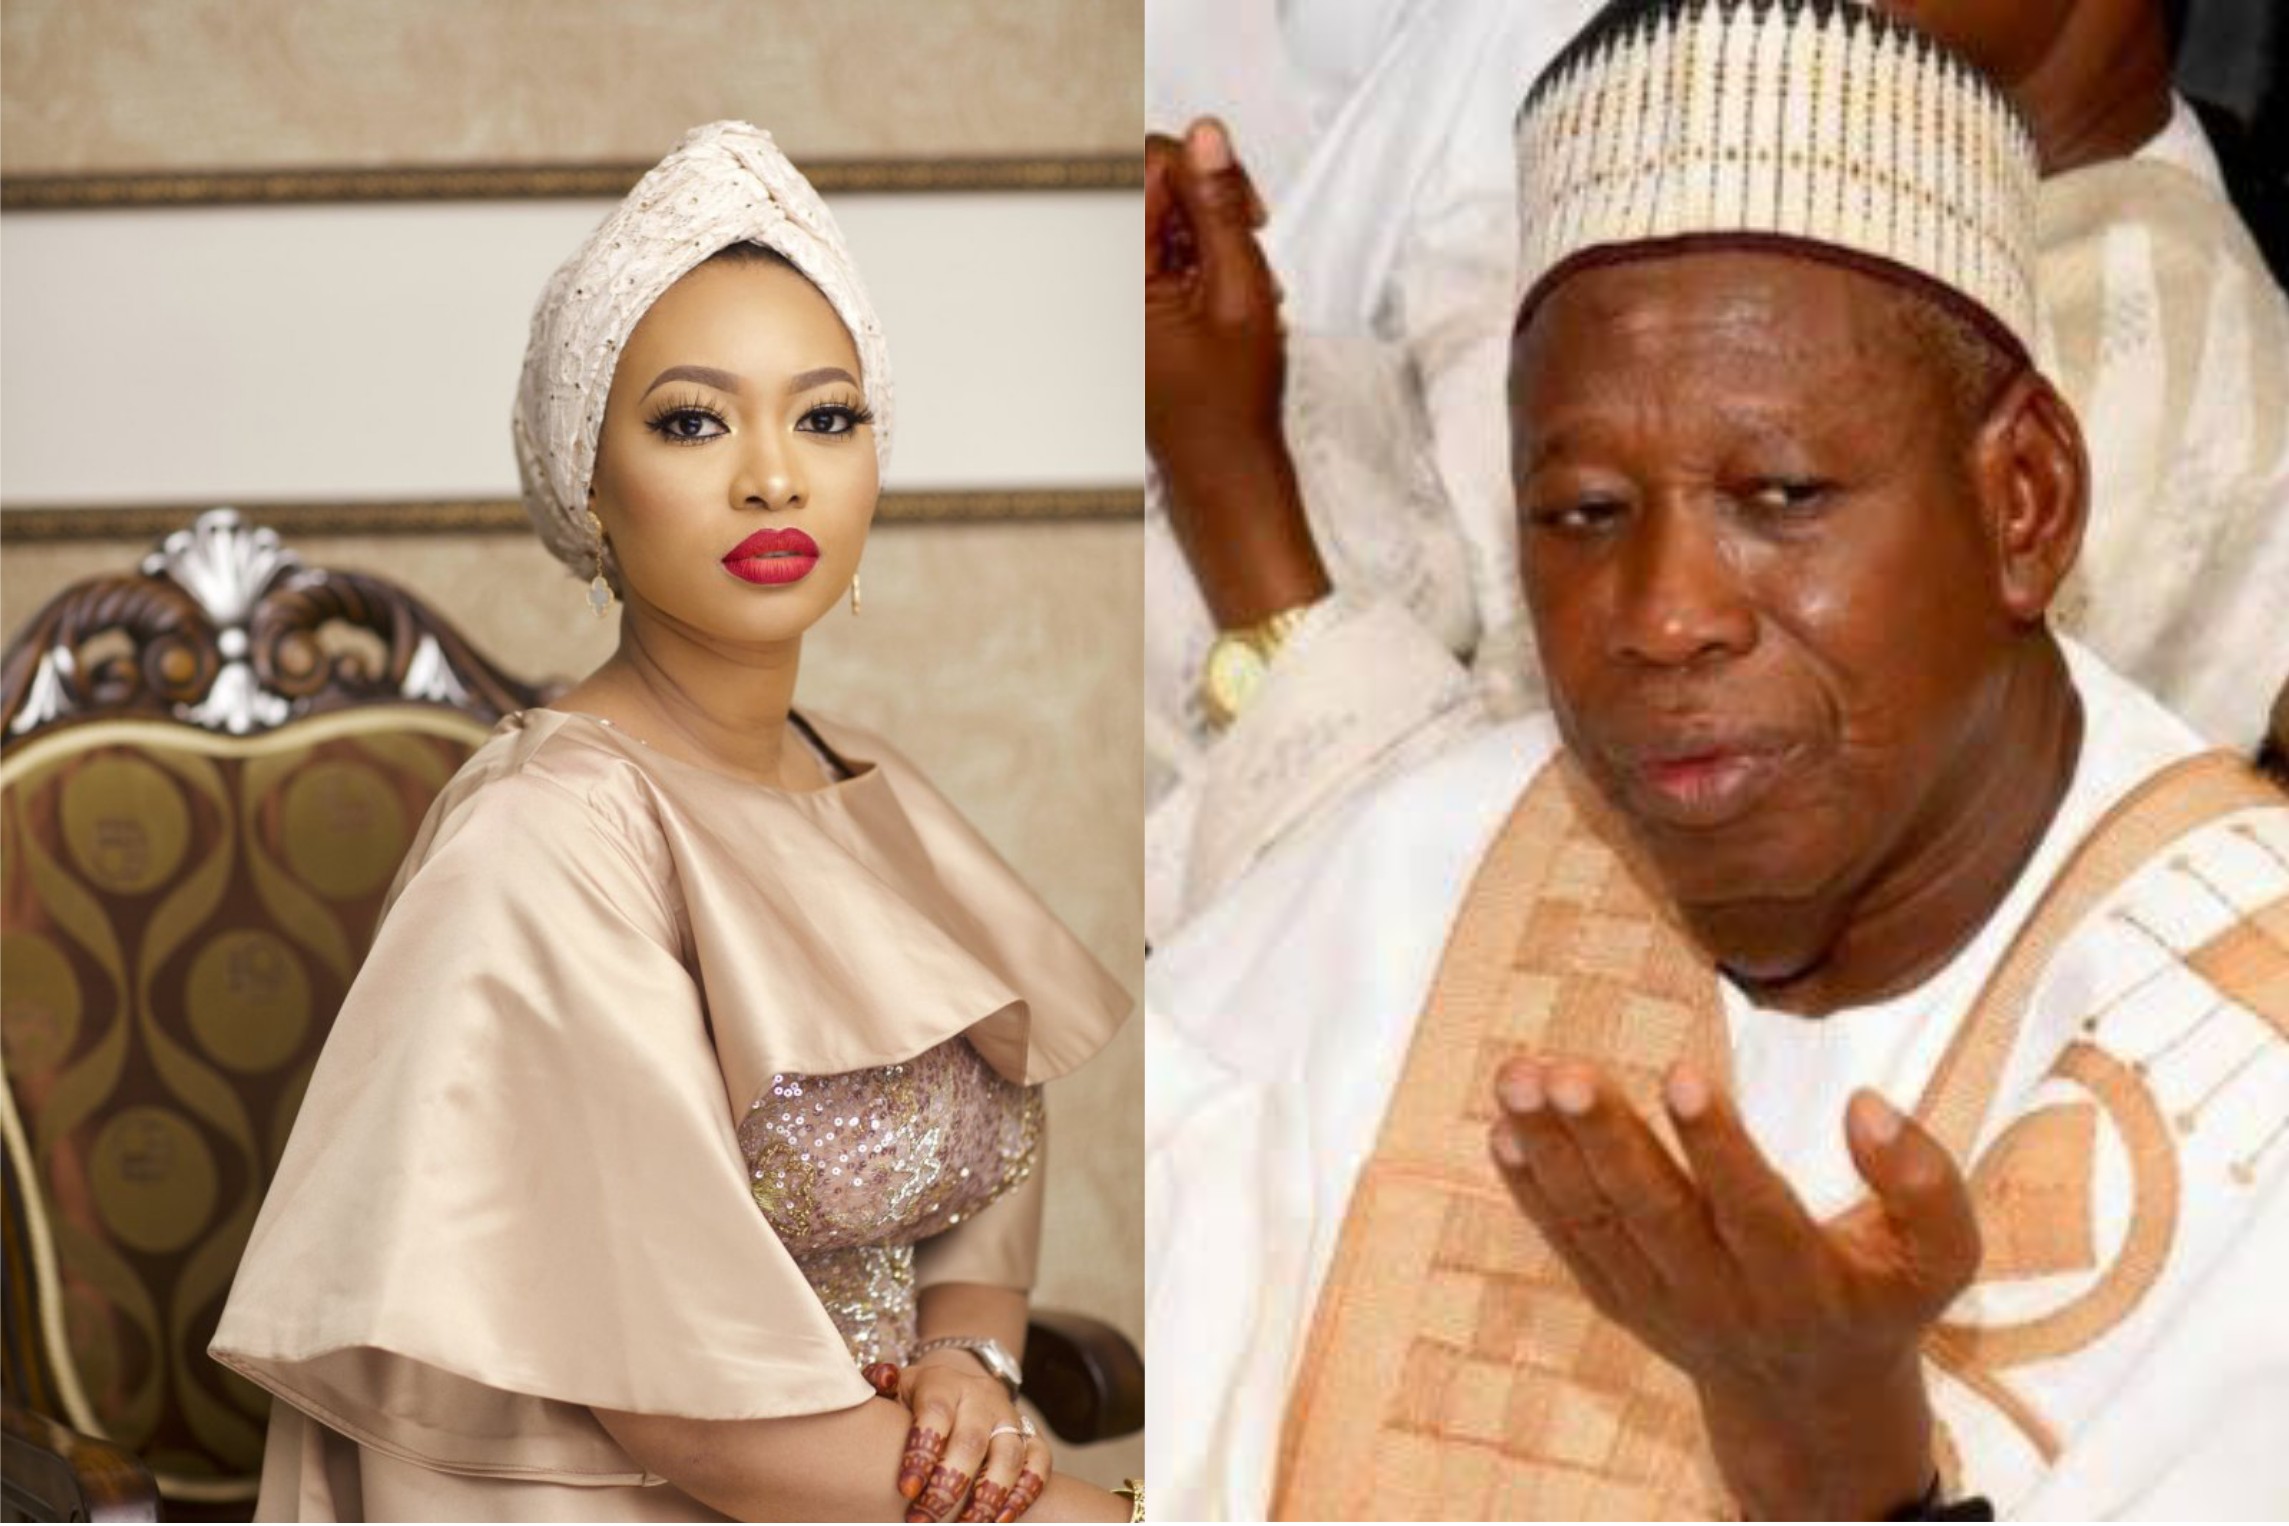 “No one should say shit about my father” – Ganduje’s daughter Fatima